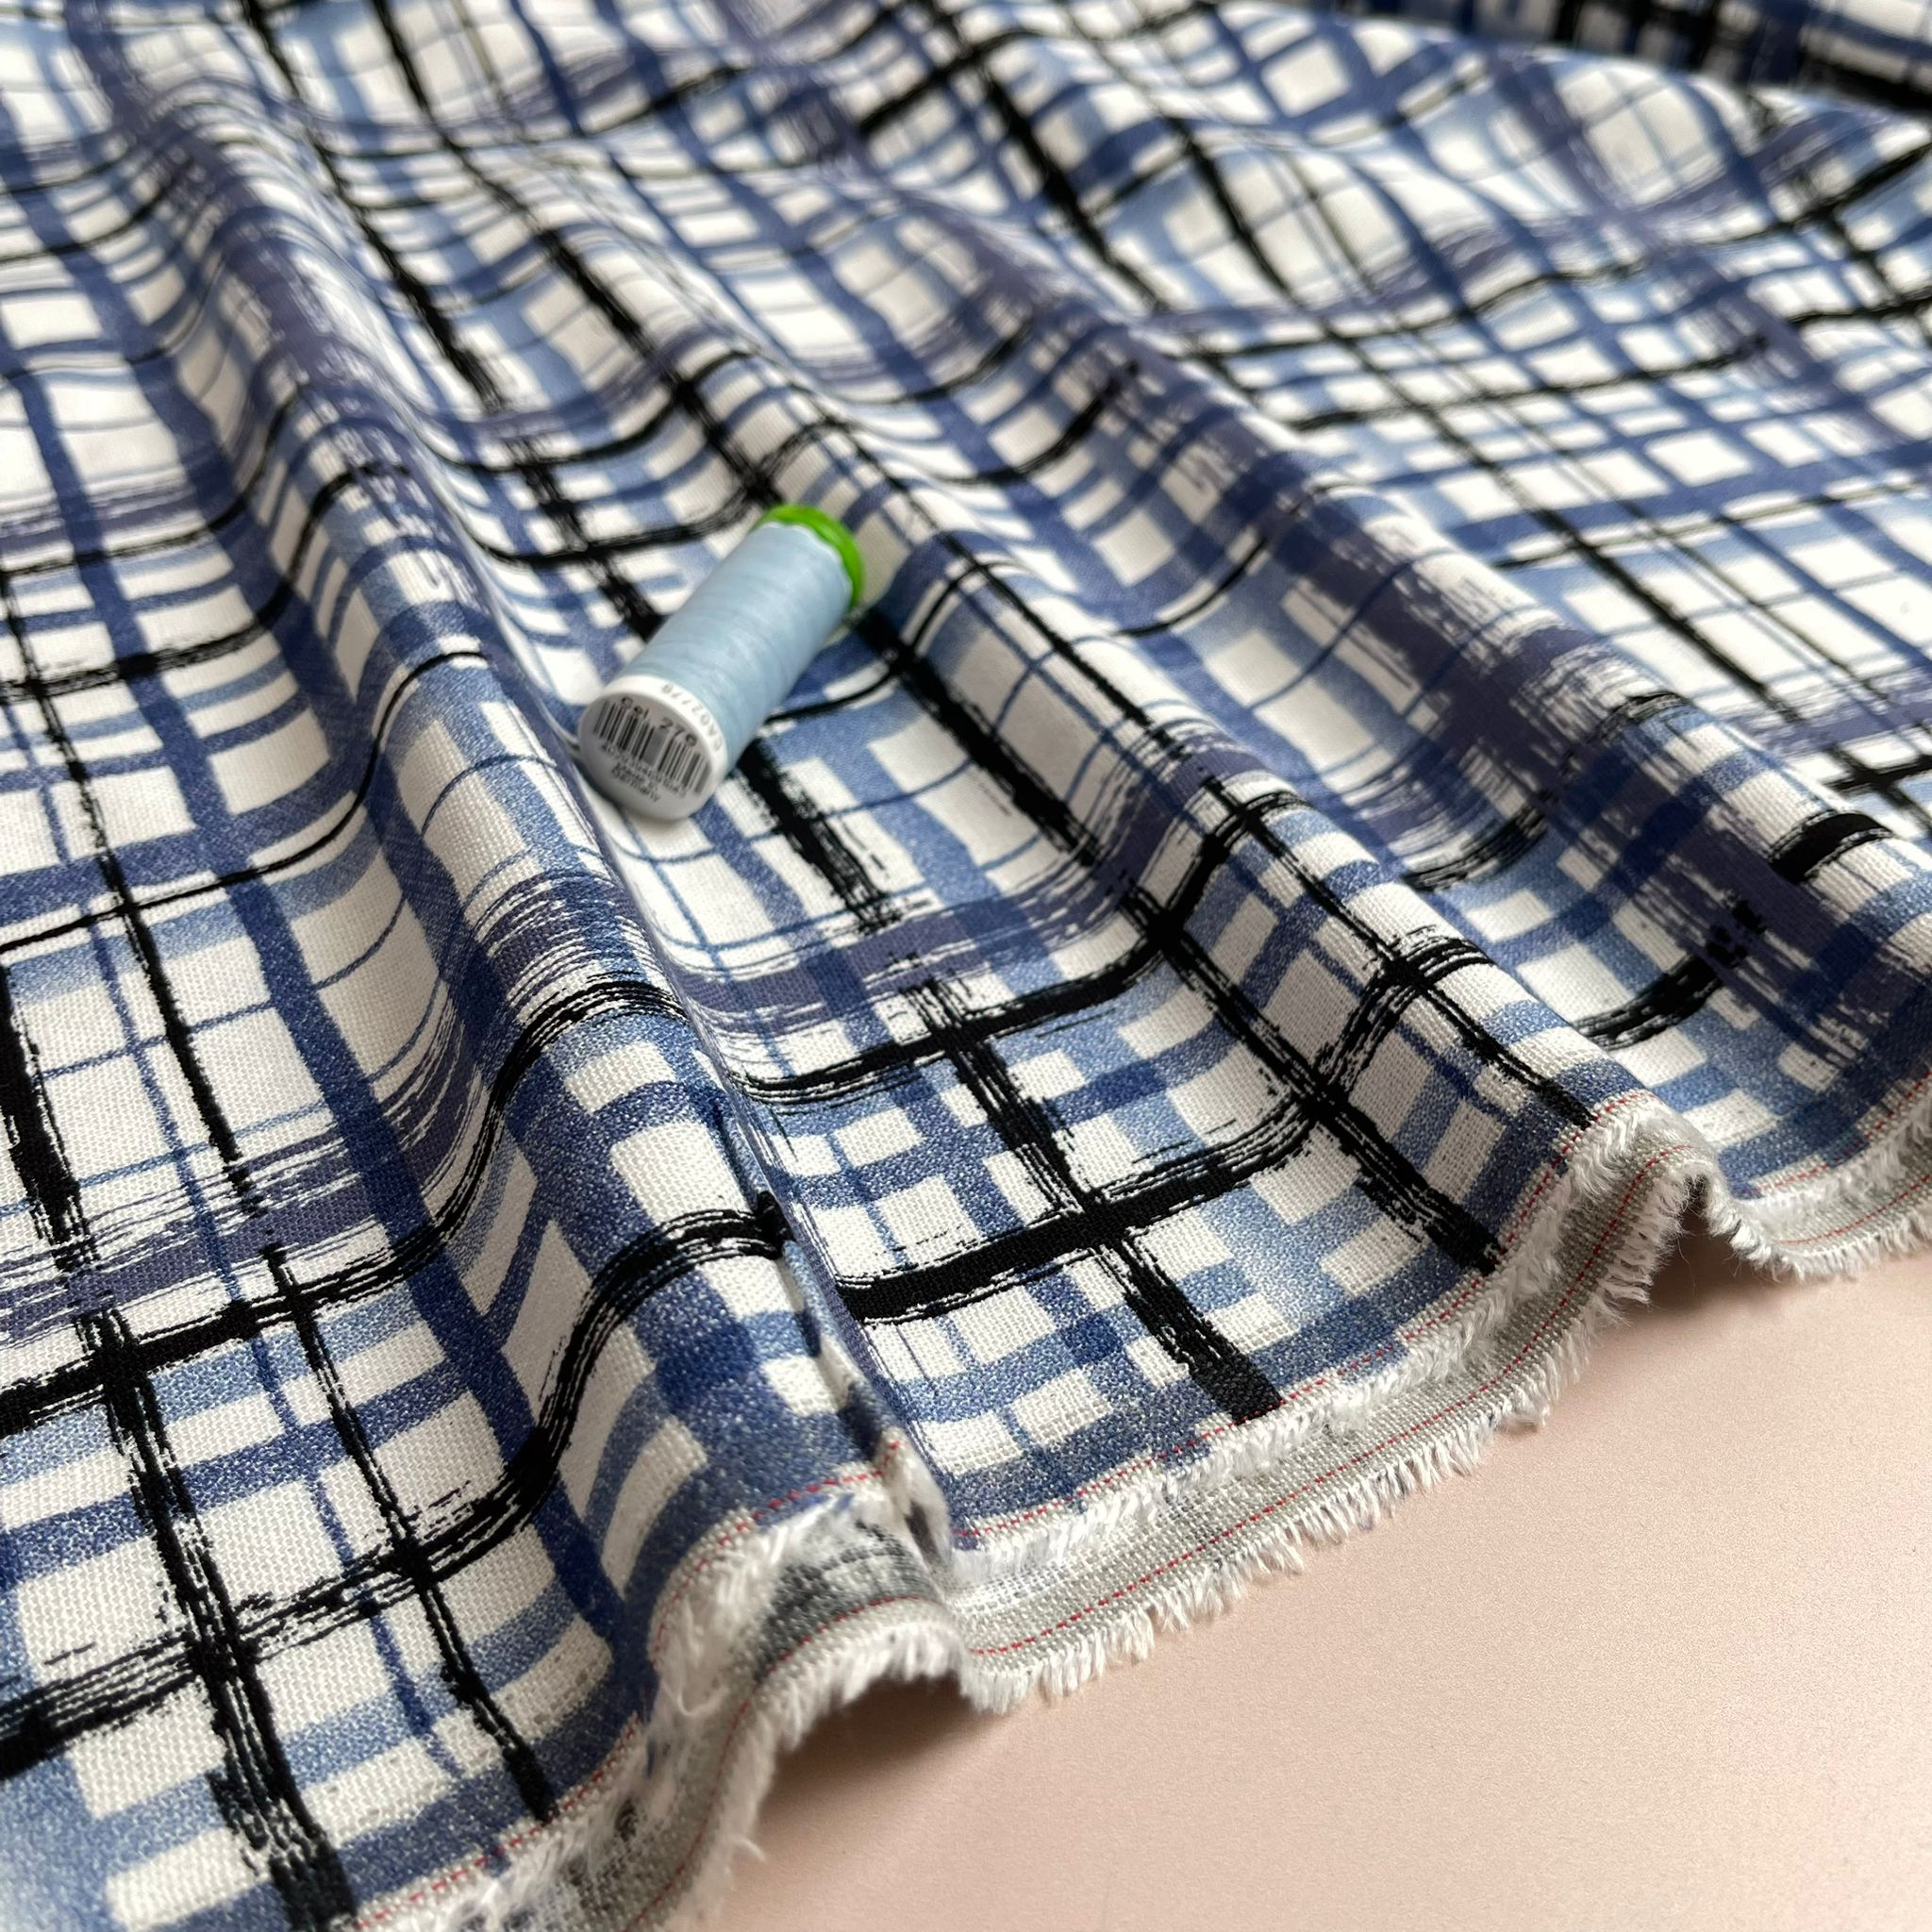 PRE-ORDER Hand painted Check on Blue Linen Viscose Blend Fabric (more due by March)